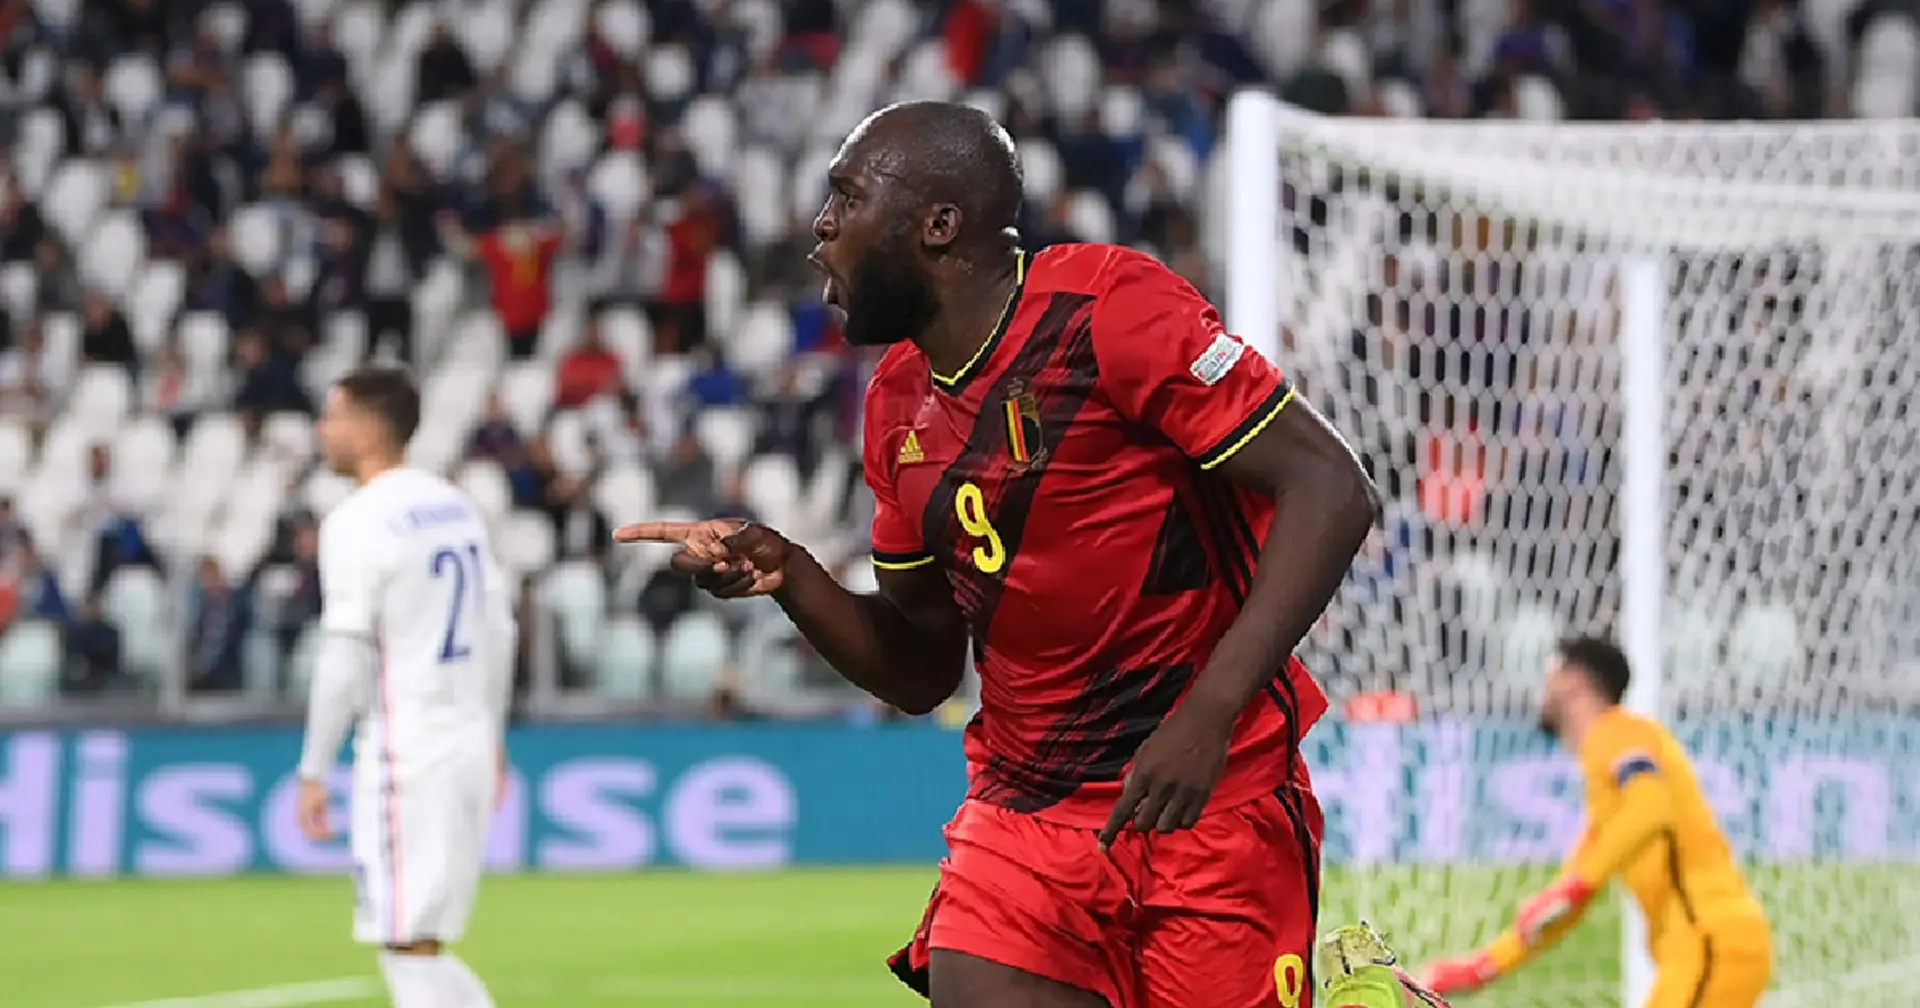 Lukaku scores but Belgium lose to France in dramatic Nations League game